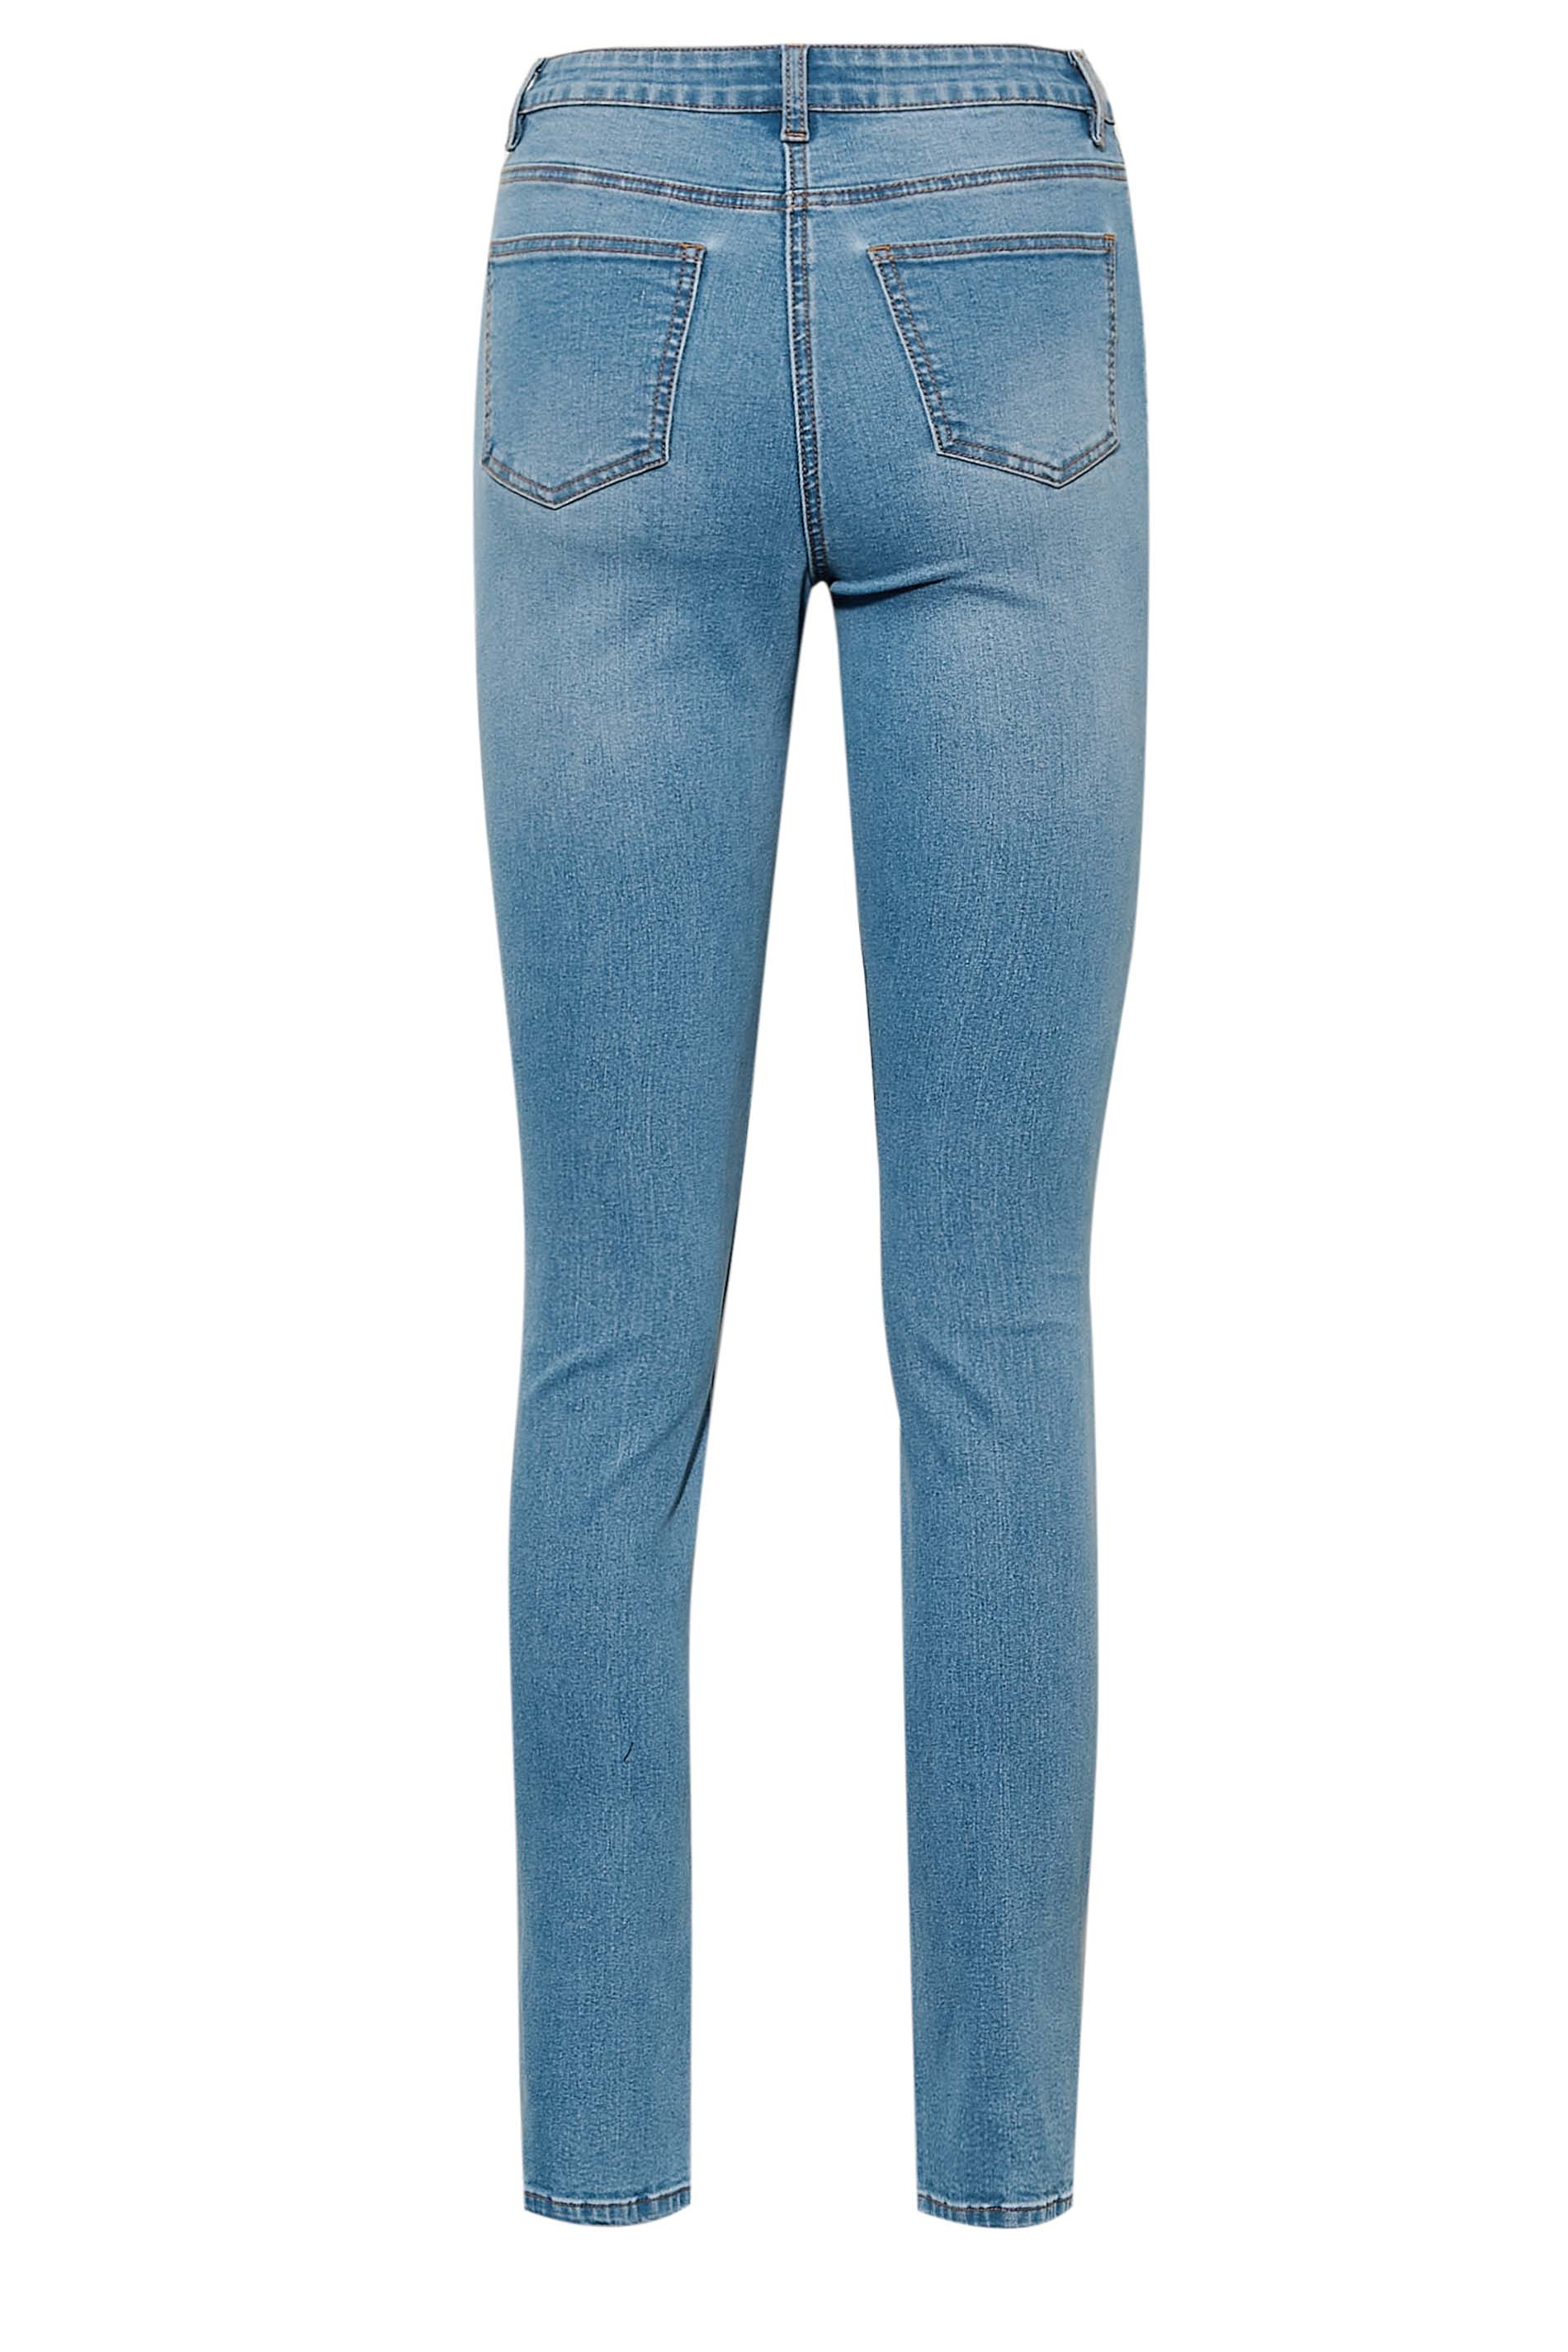 LTS Tall Women's Blue Button Fly Distressed Slim Jeans | Long Tall Sally